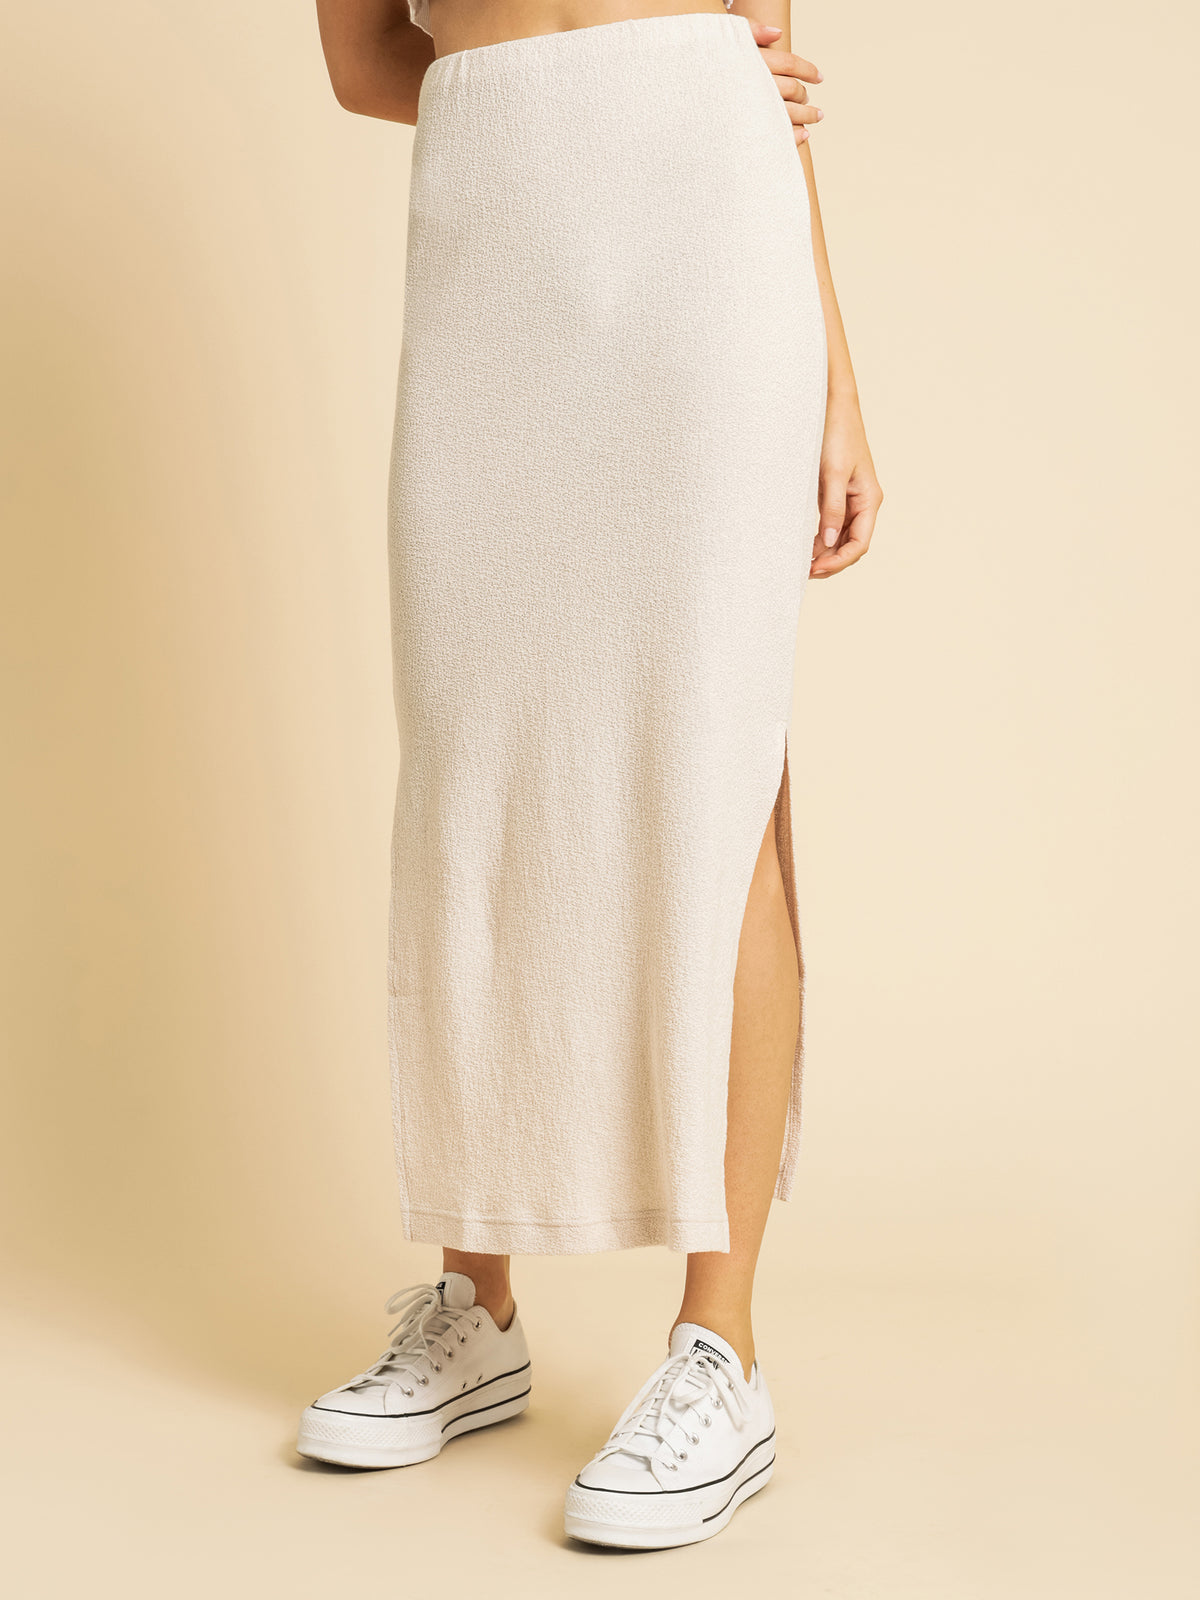 Bowie Textured Midi Skirt in Oat